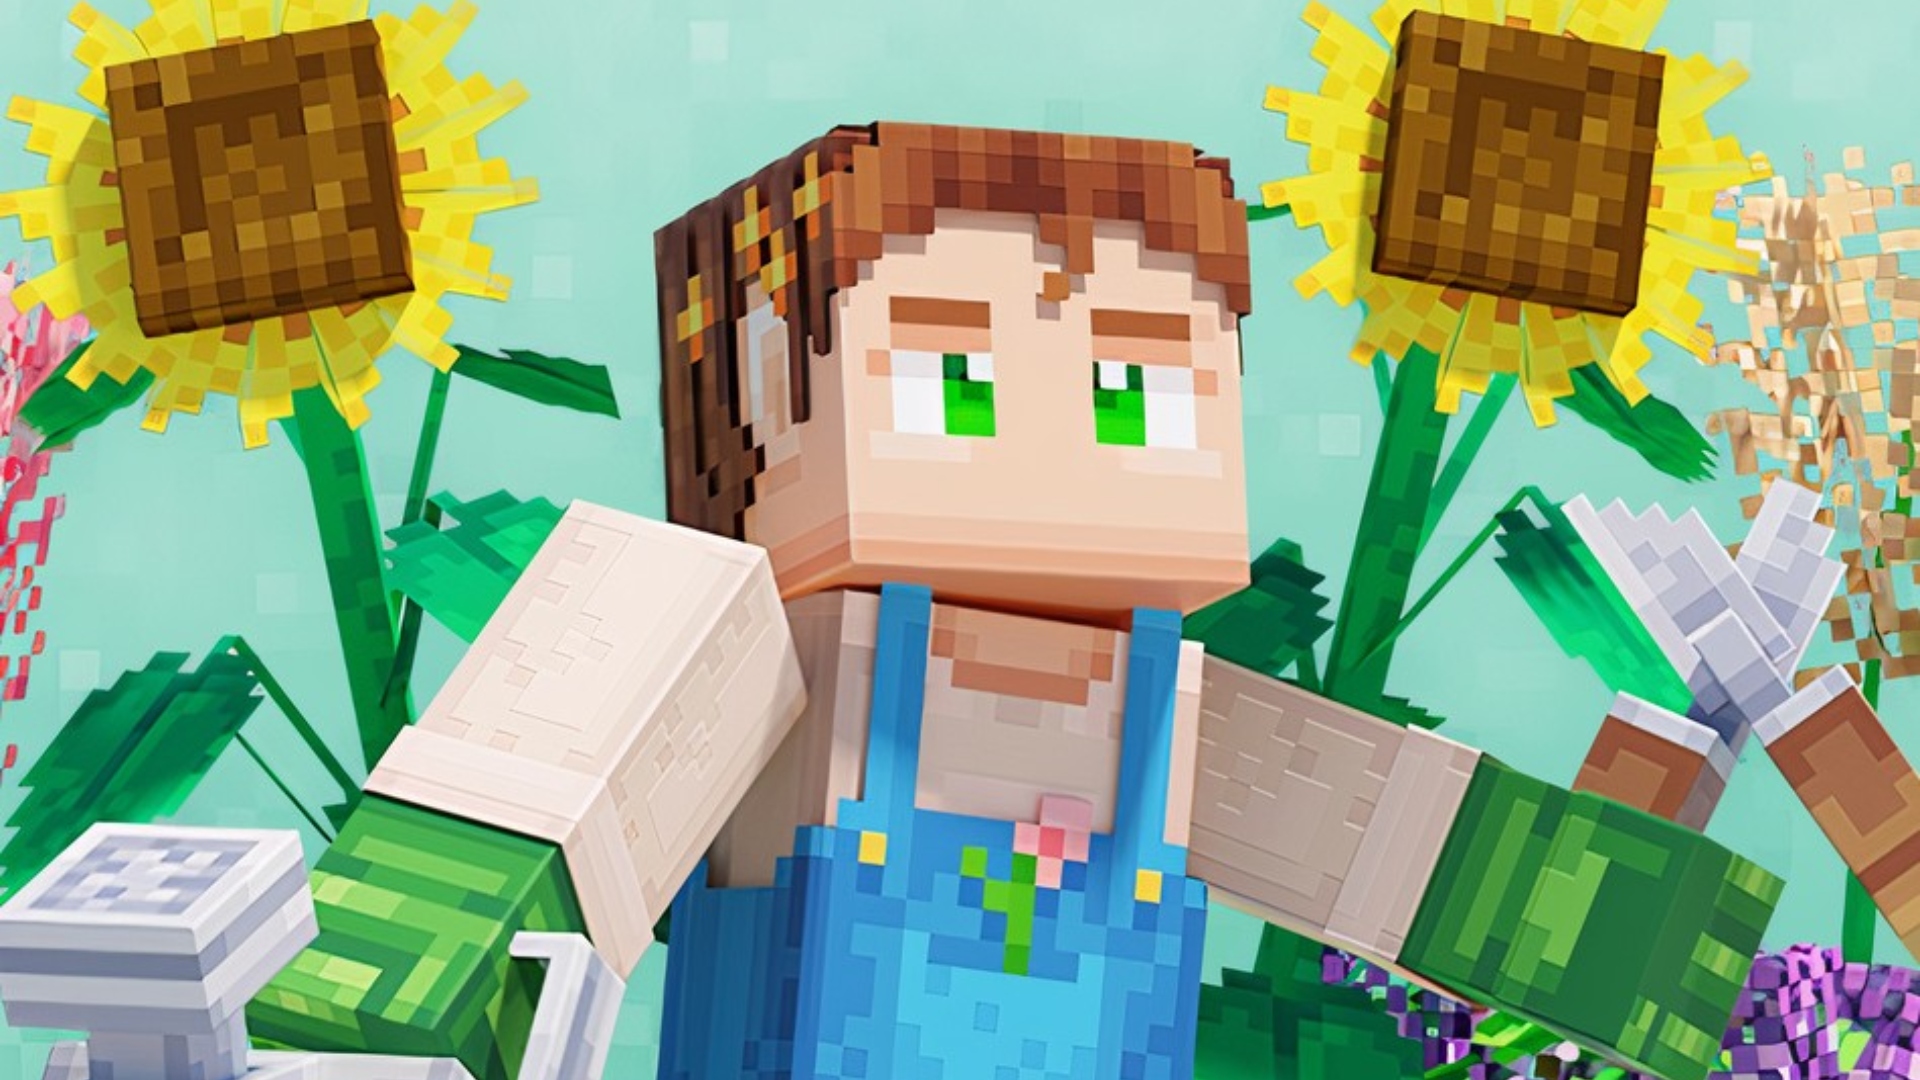 Minecraft is about to get a new boss says Mojang – and a villager